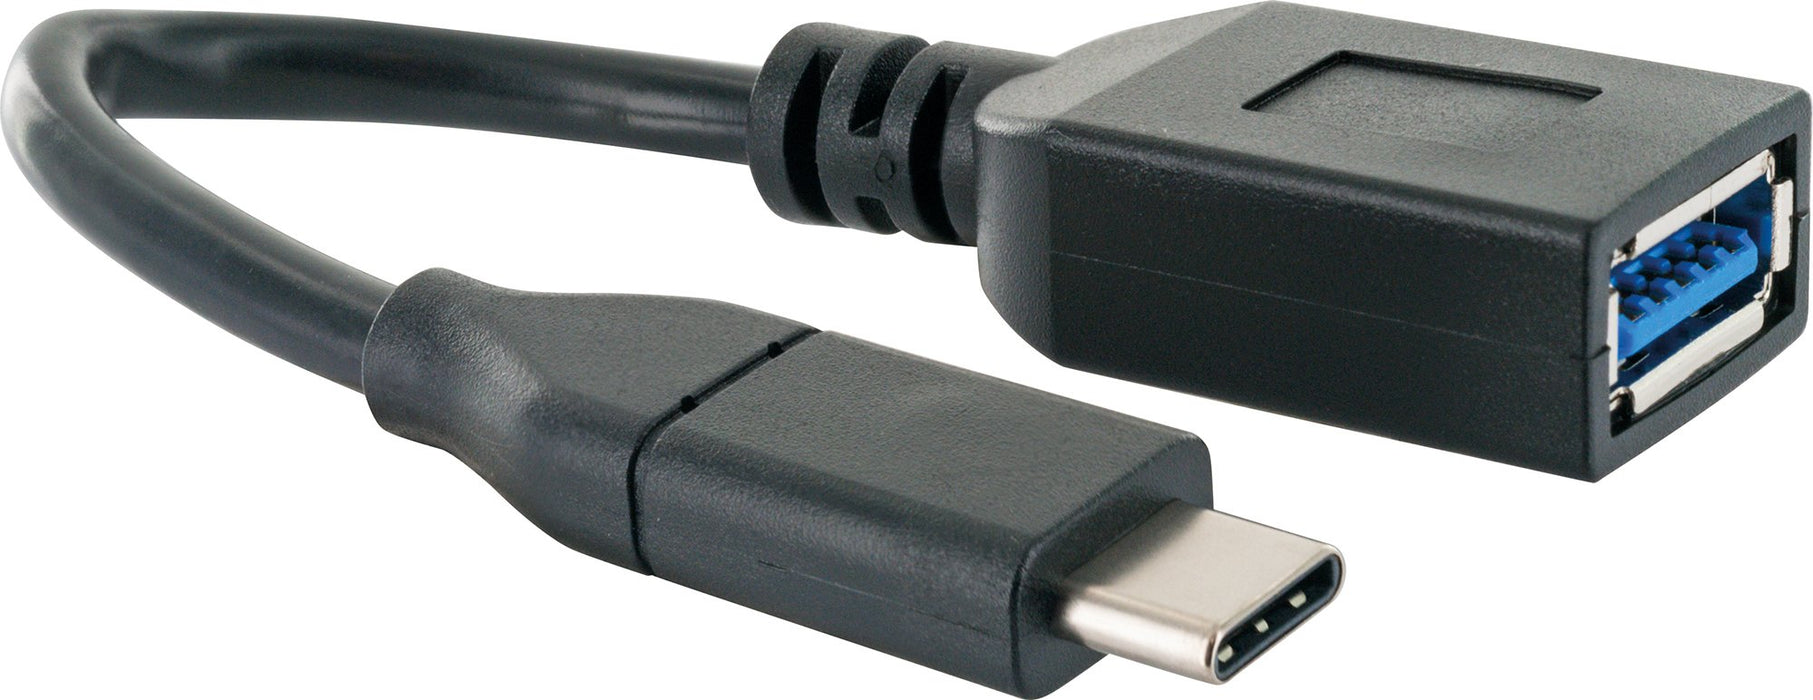 USB 3.2 connection cable